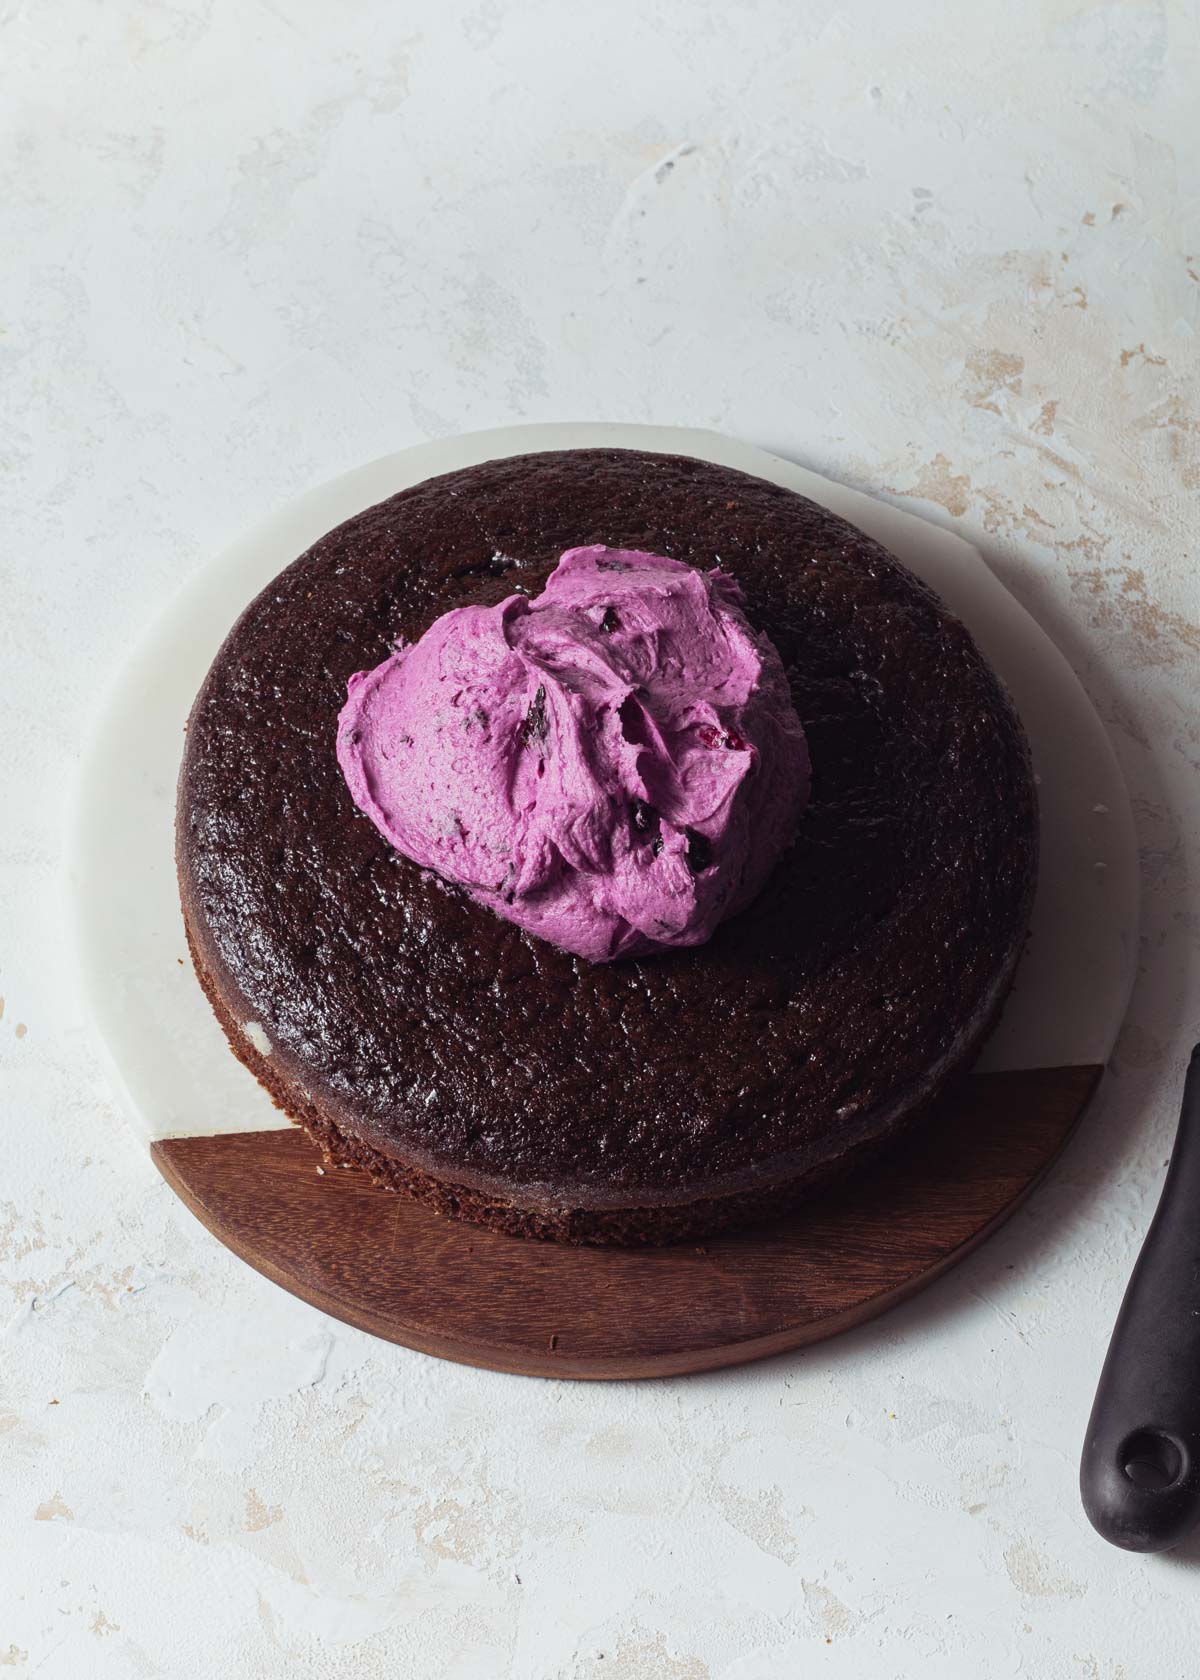 A layer of chocolate cake with blueberry frosting